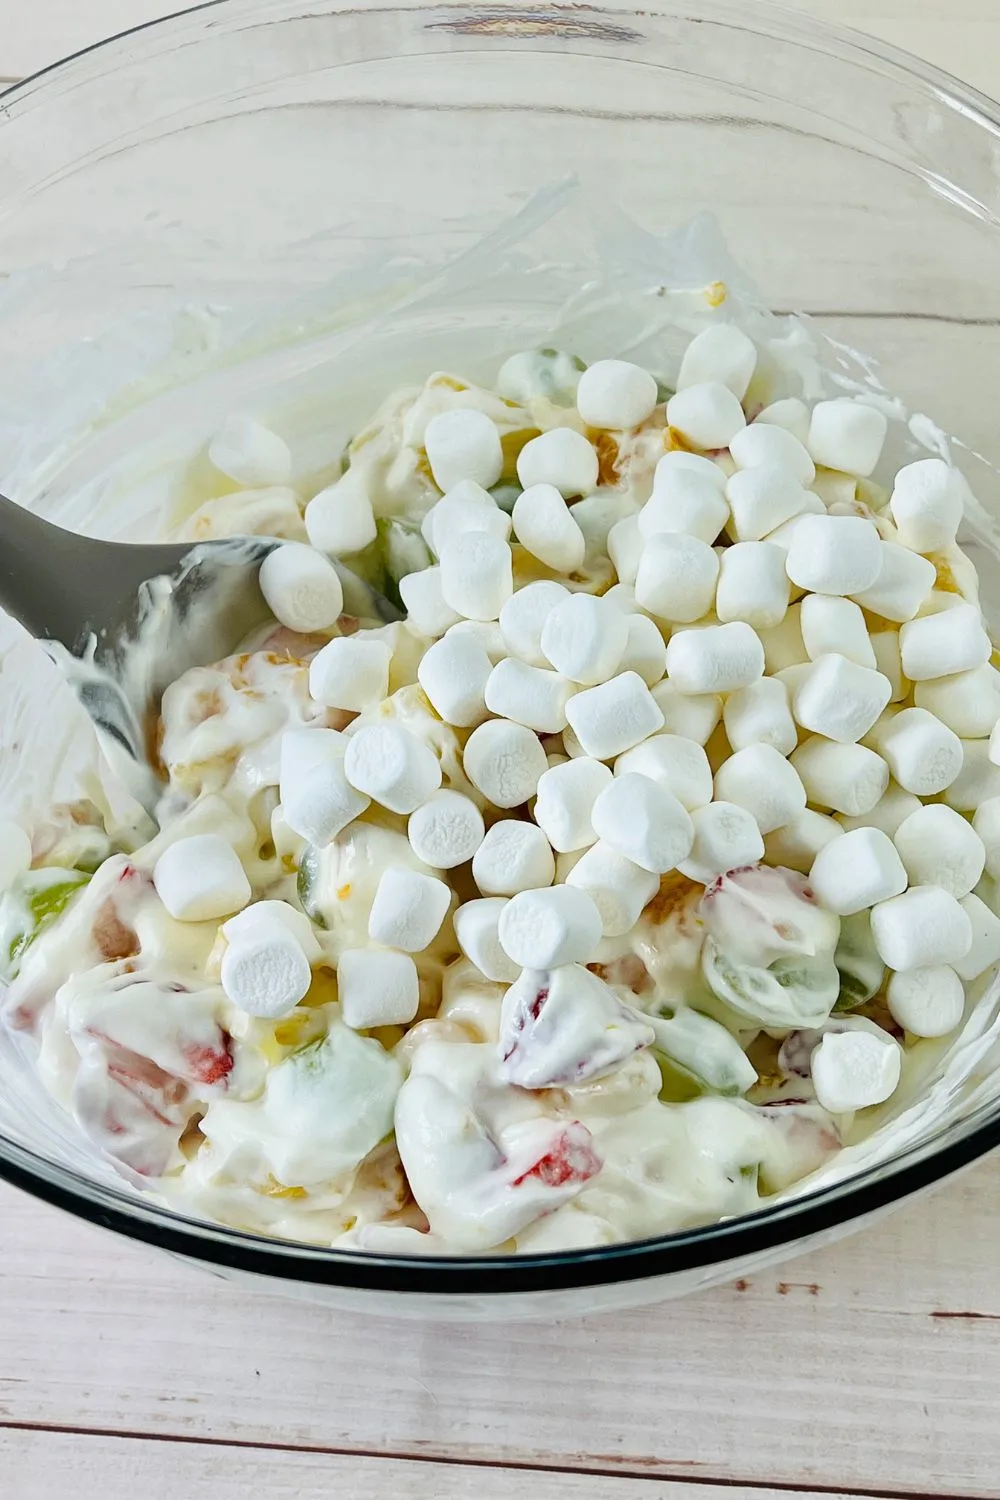 marshmallows being added to a fruit salad